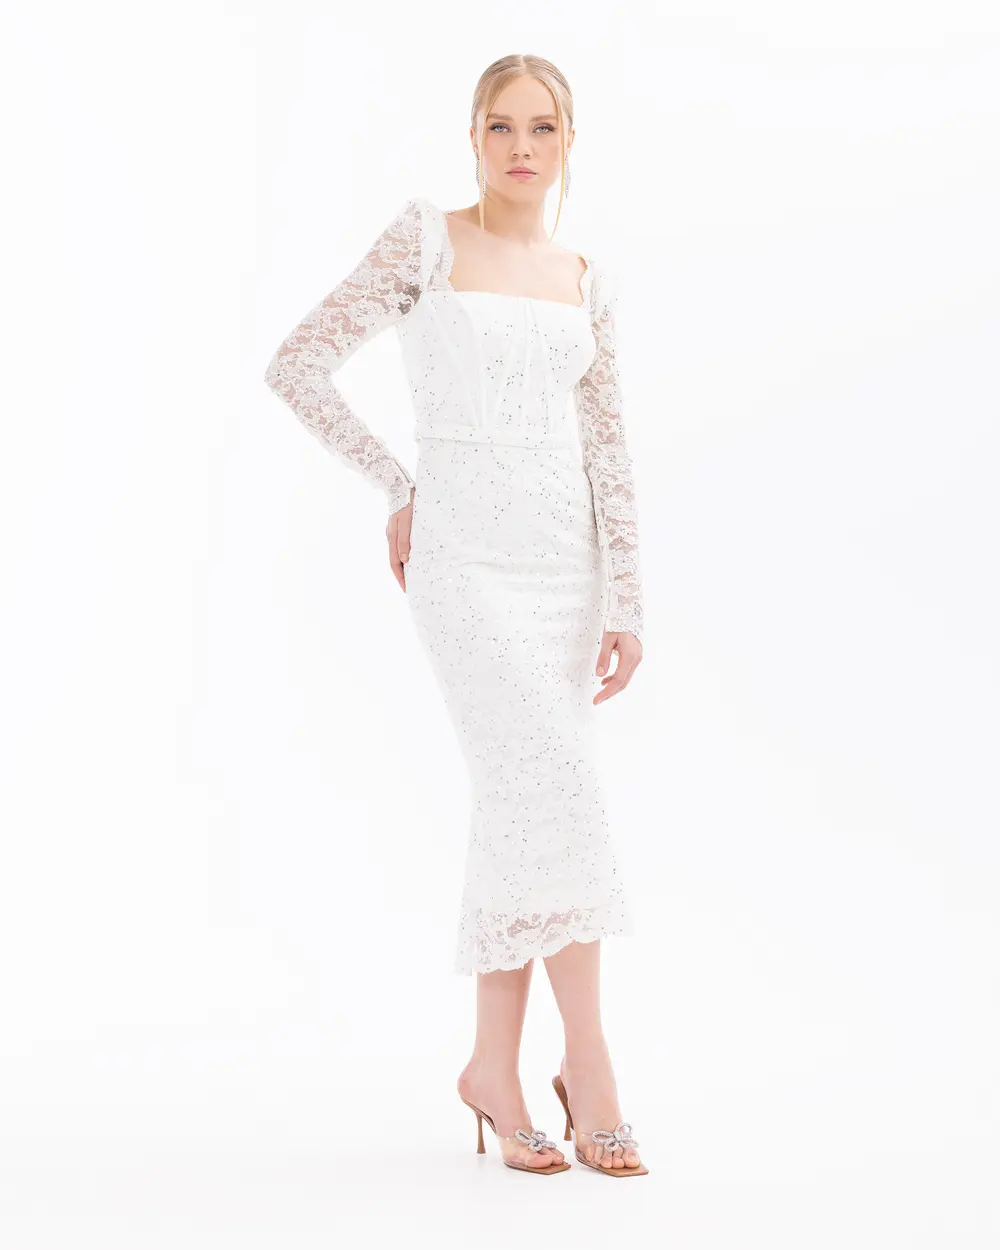 Narrow Form Silvery Lace Evening Dresses